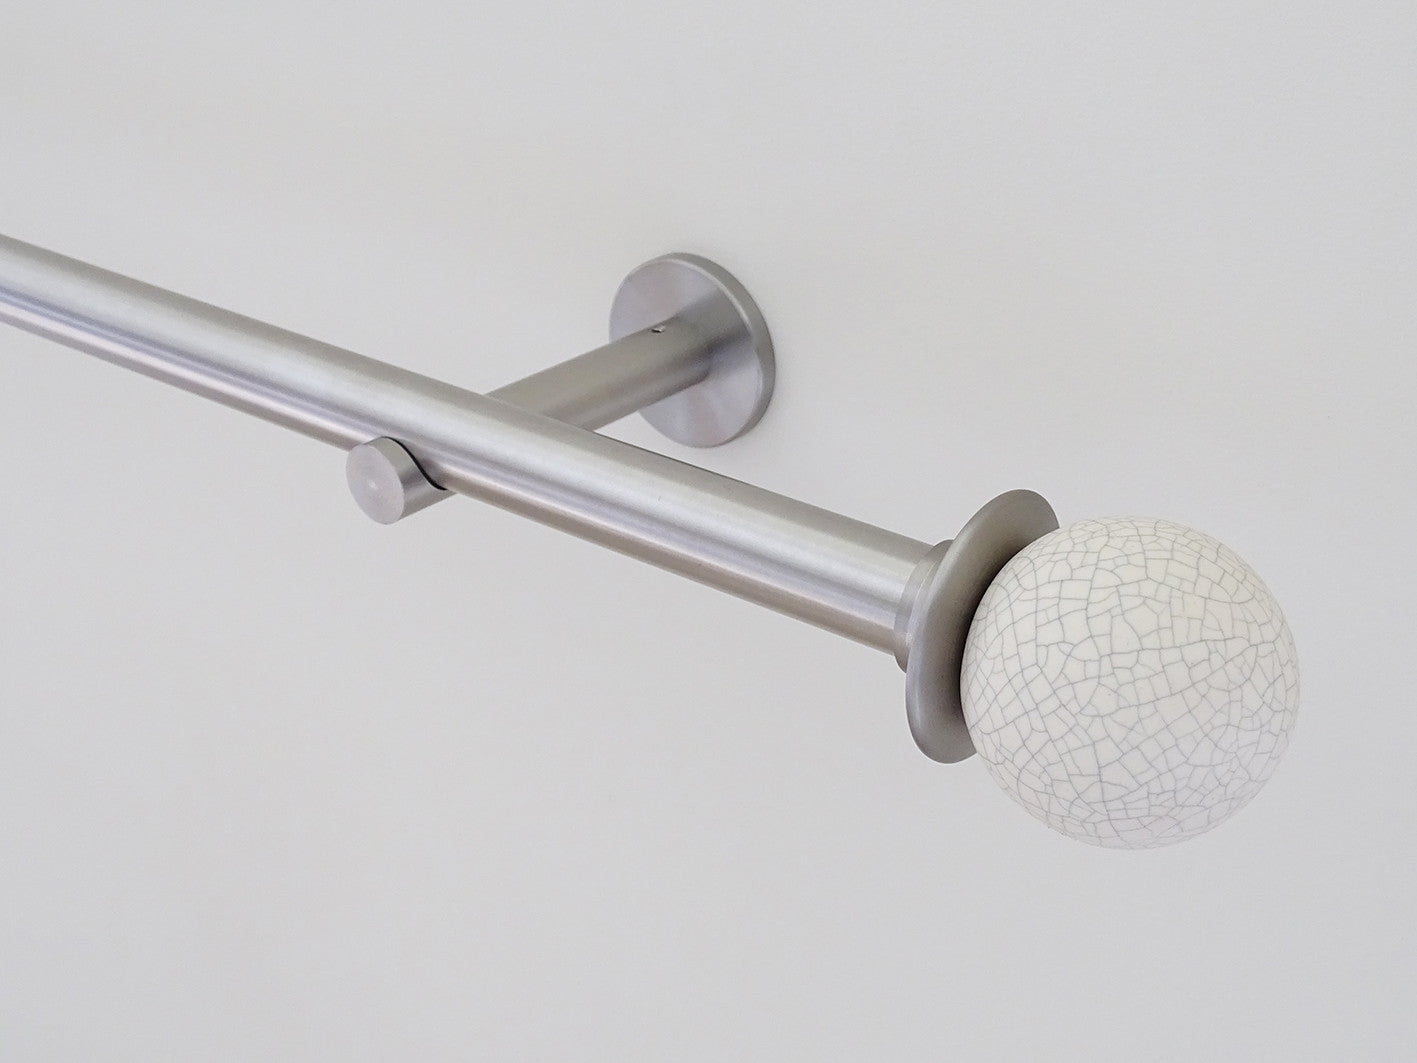 Crackle finial with brushed steel adapter mounted on 19mm pole set